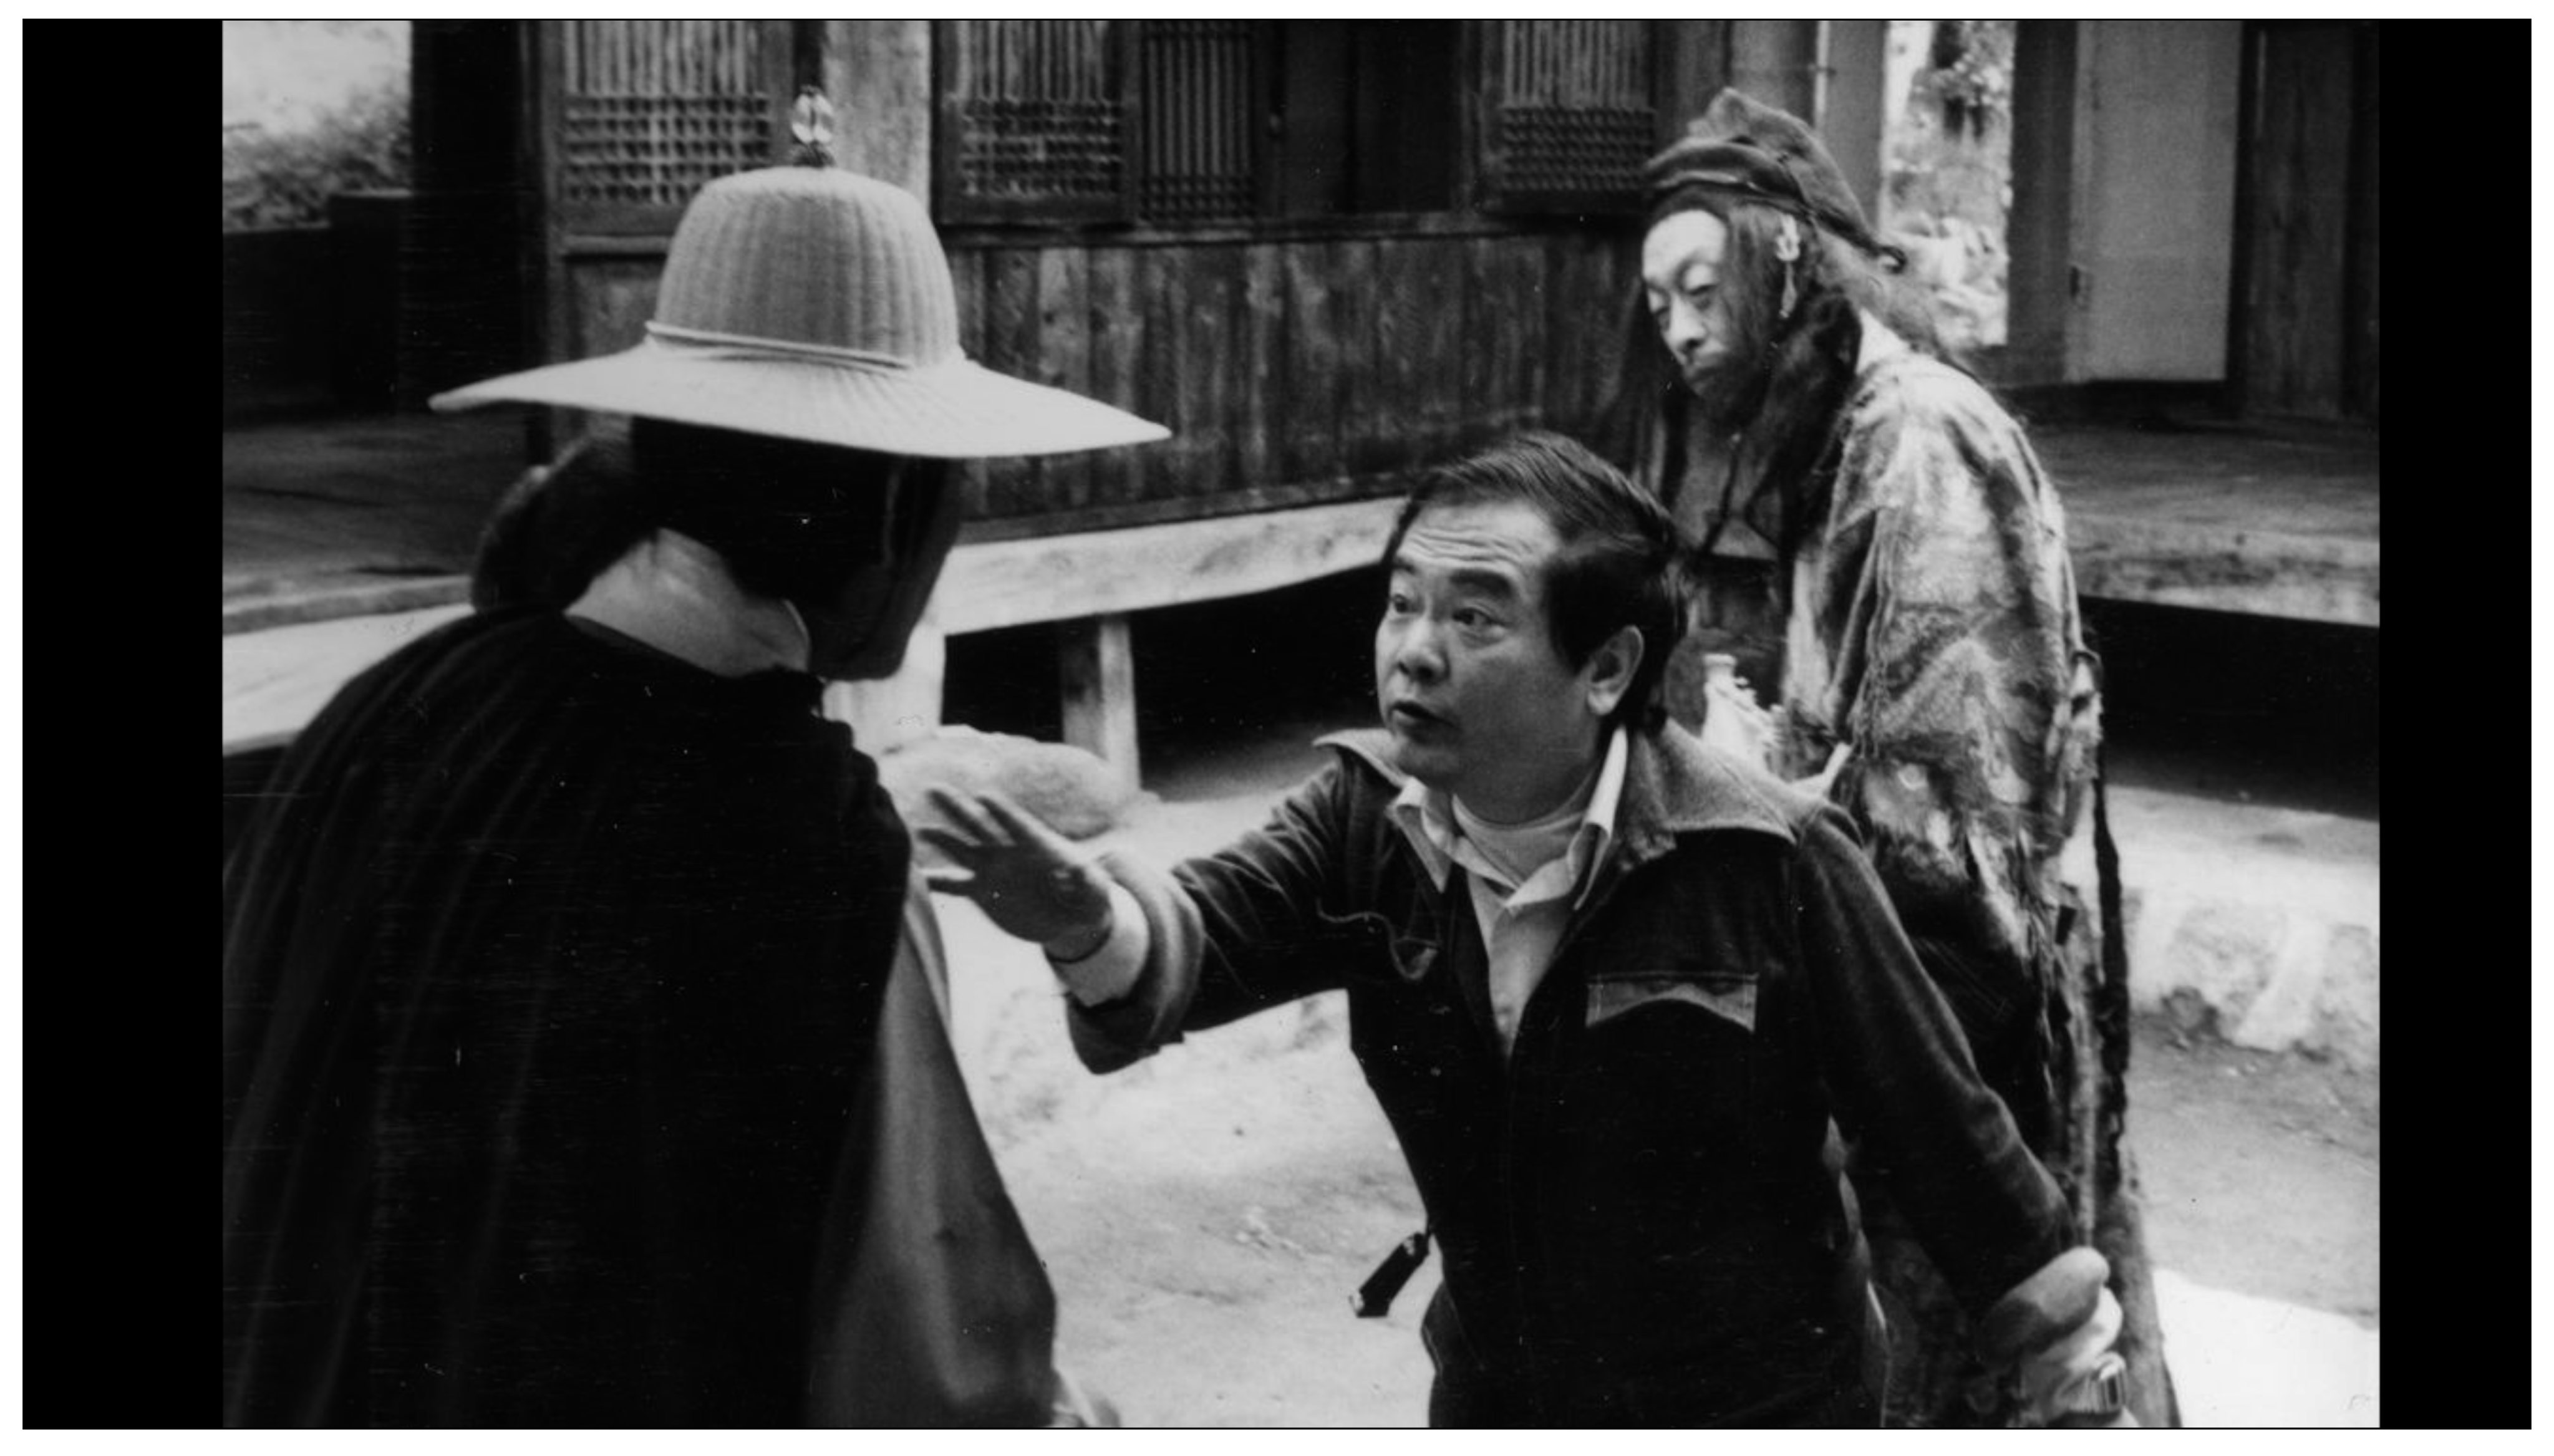 King Hu (centre) on a film set, in a still from “The King of Wuxia Part 2: The Heartbroken Man on the Horizon” (category IIA, Mandarin), directed by Lin Jing-jie.